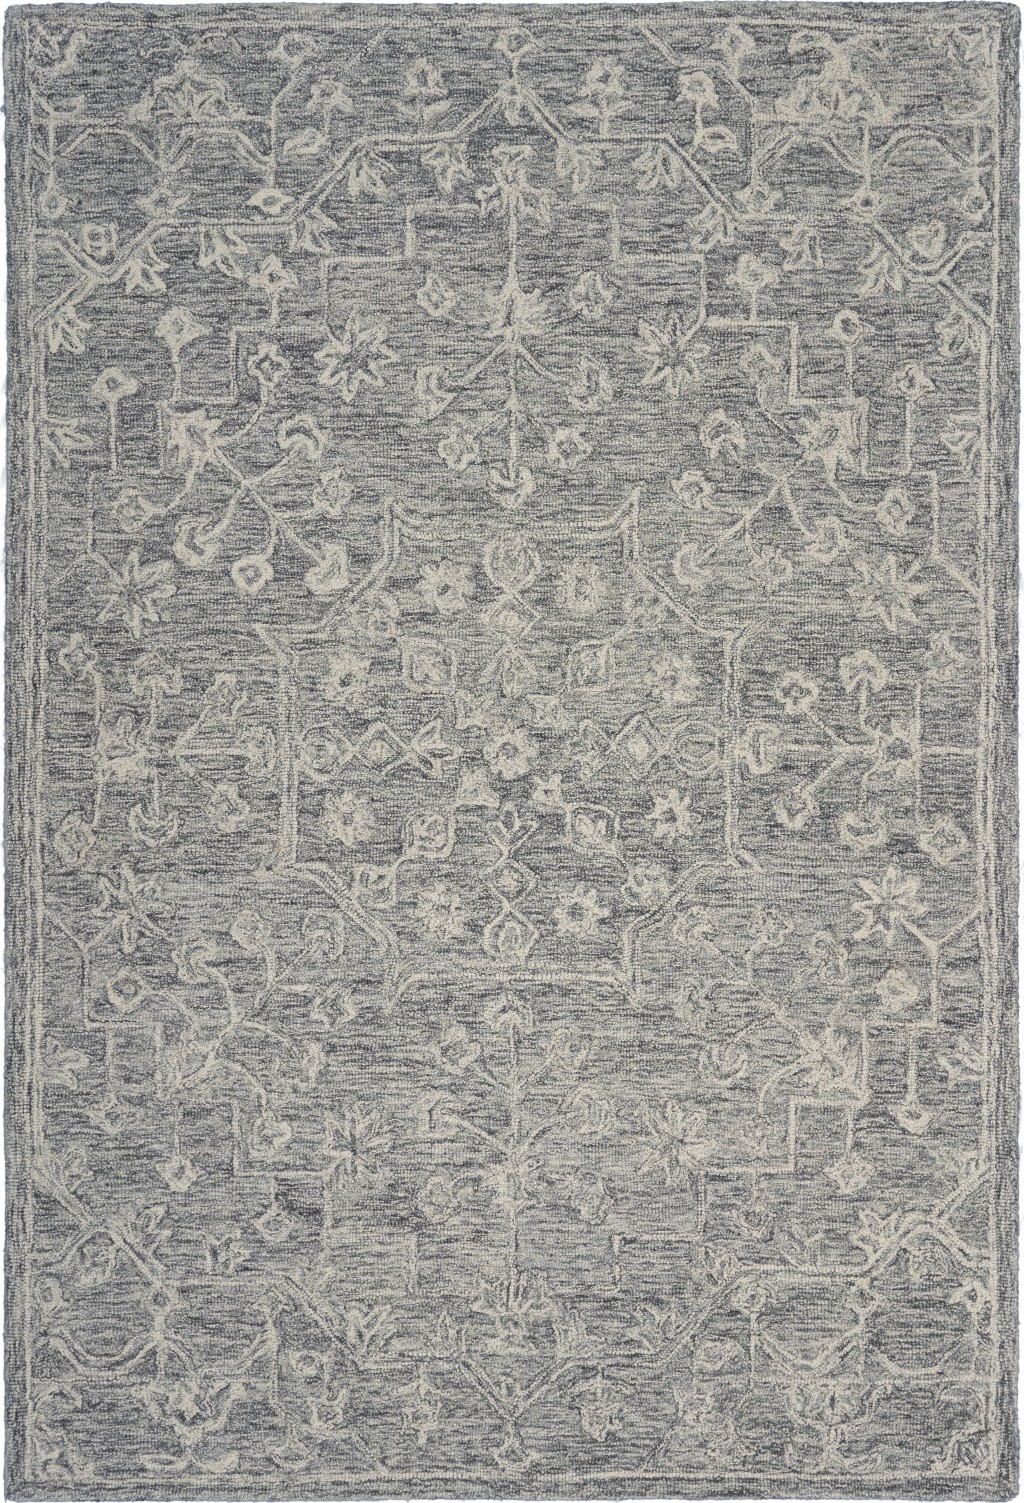 3’ x 5’ Gray Floral Finesse Area Rug-395786-1